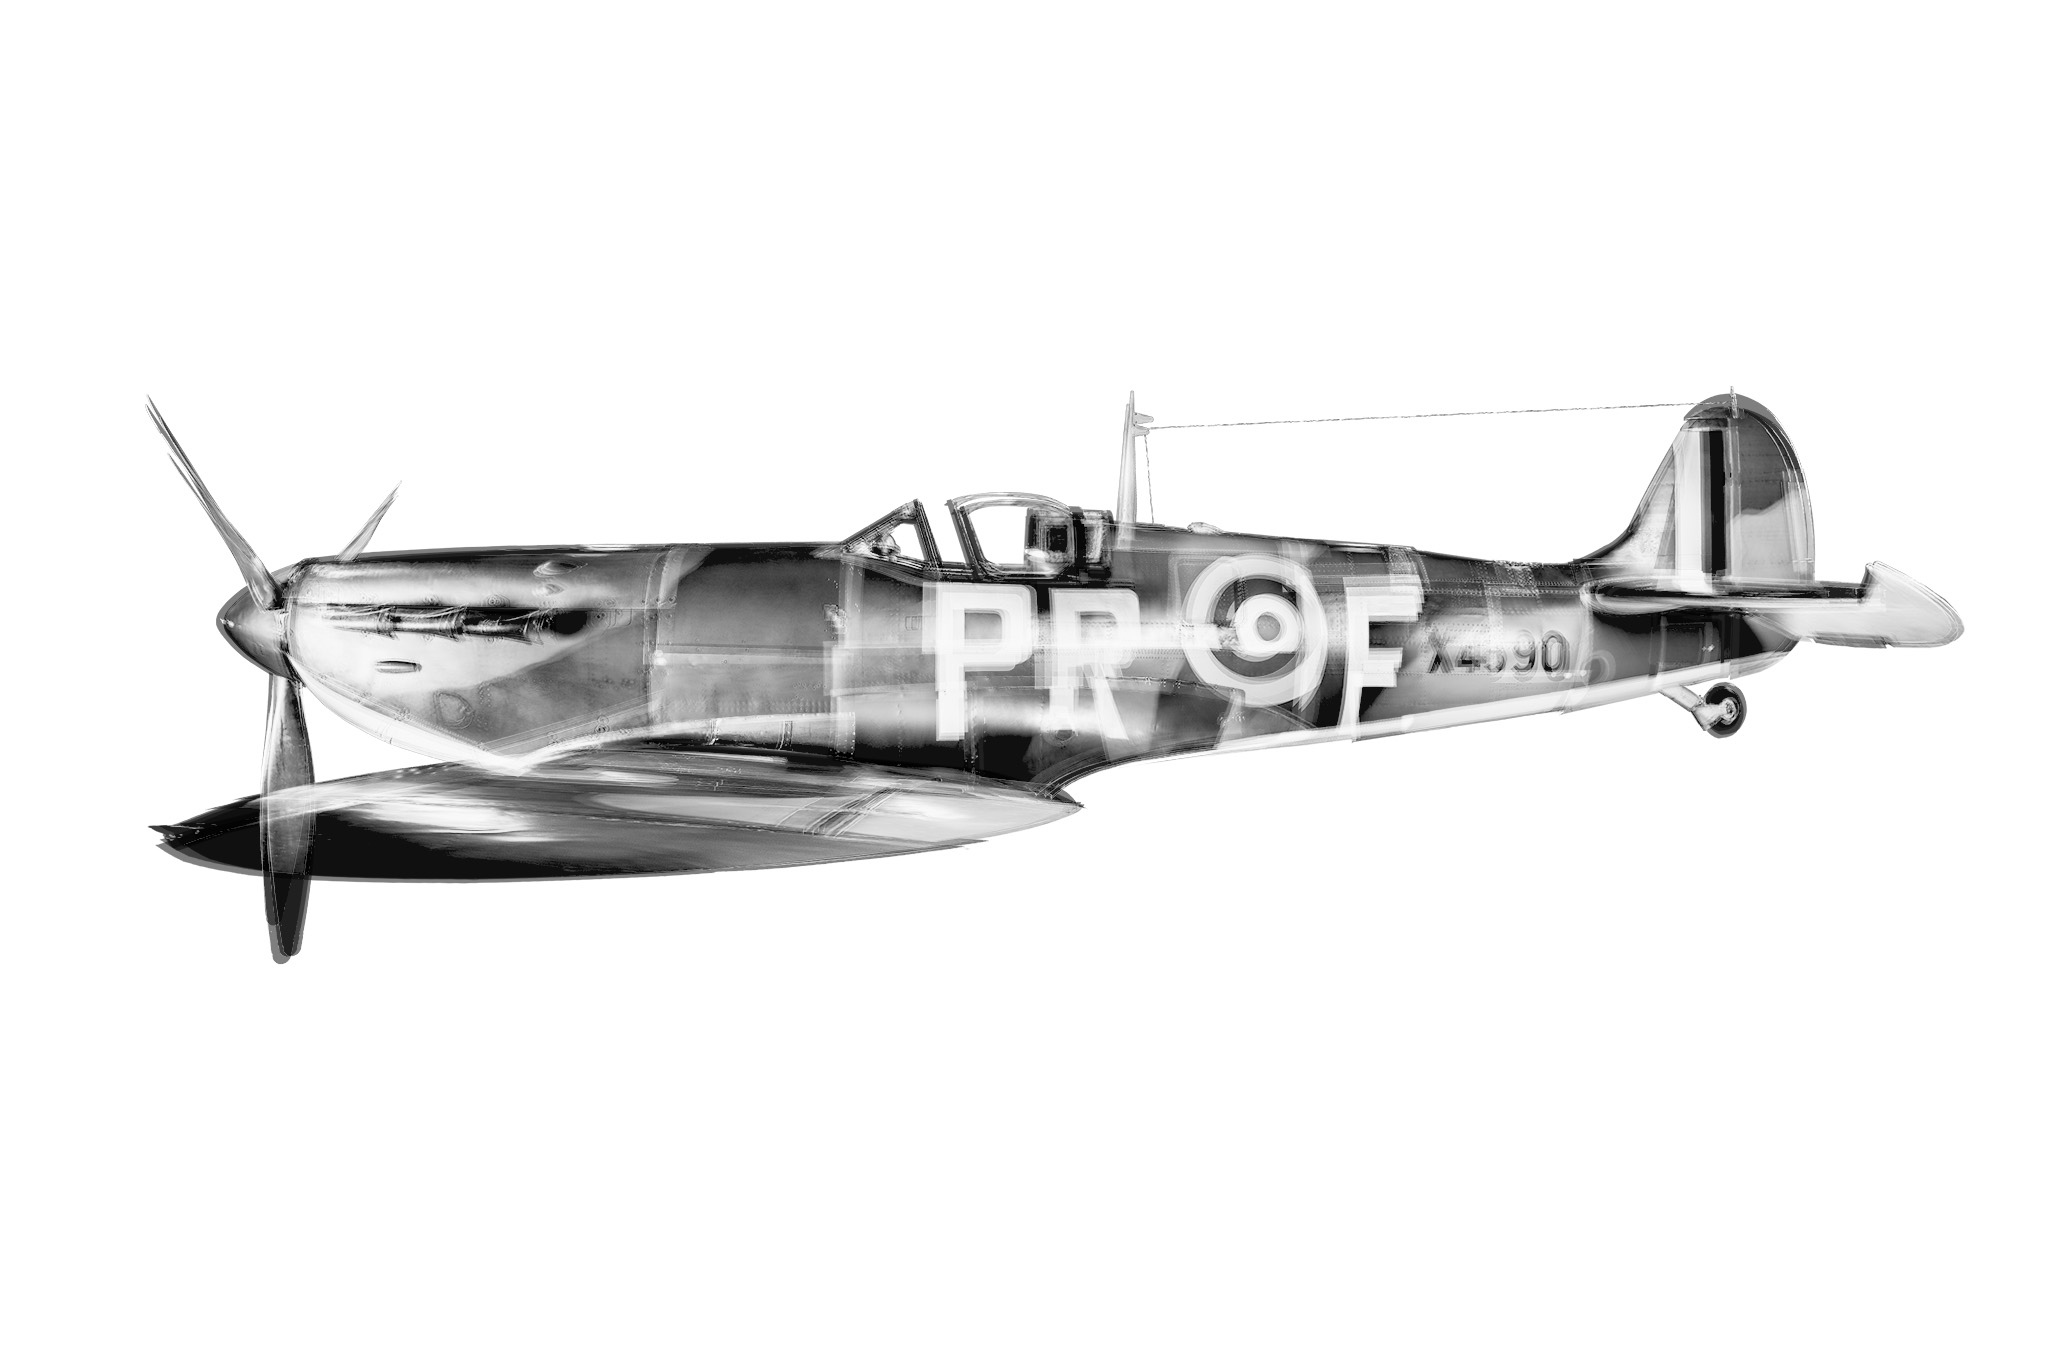 Black and white composite photograph of a British Supermarine Spitfire